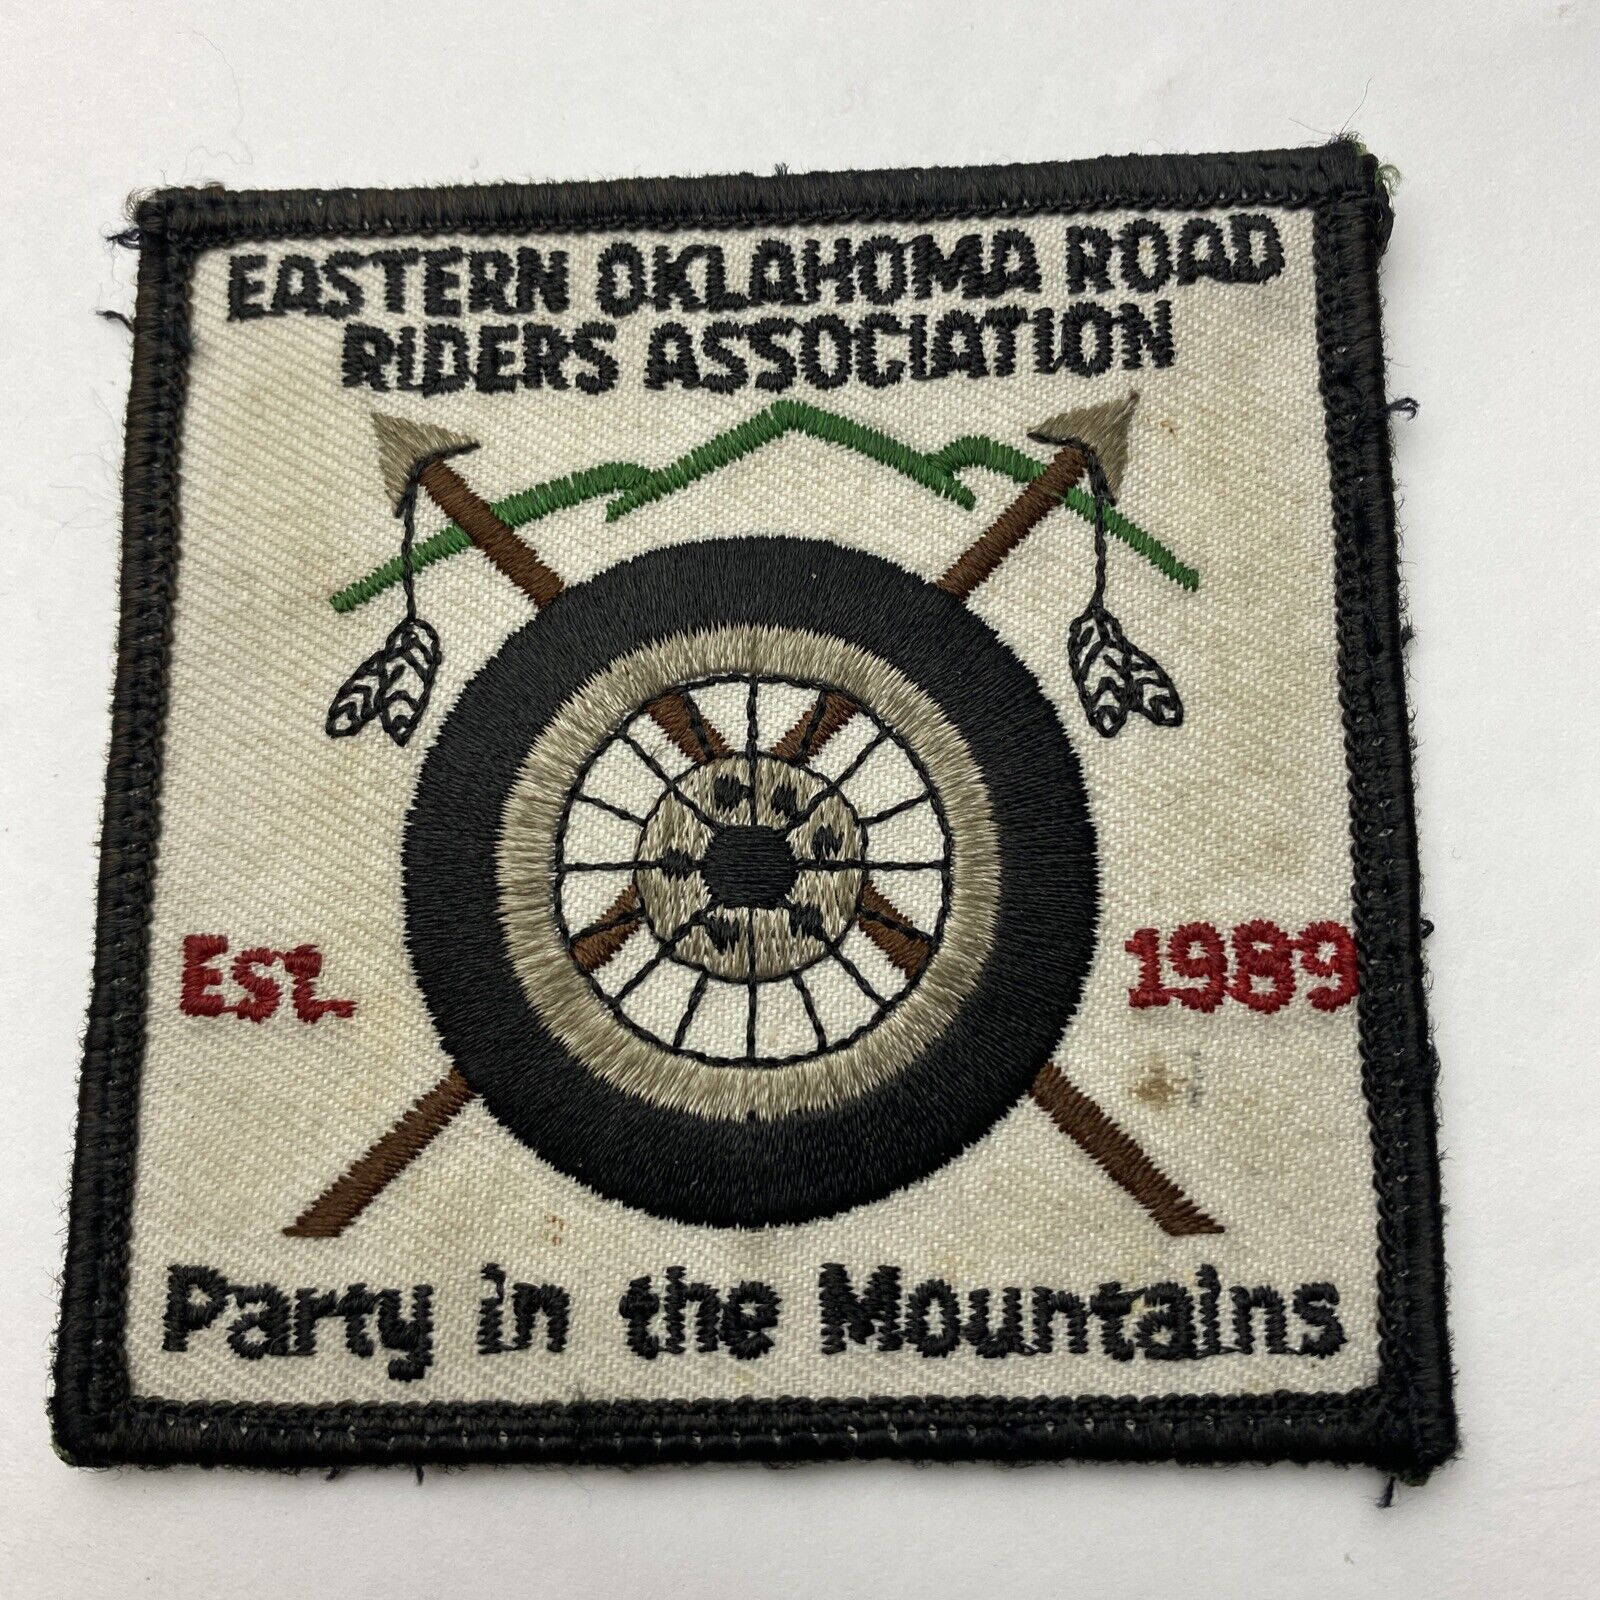 1989 Eastern Oklahoma Road Riders Association Party in the Mountains Aarows Whe